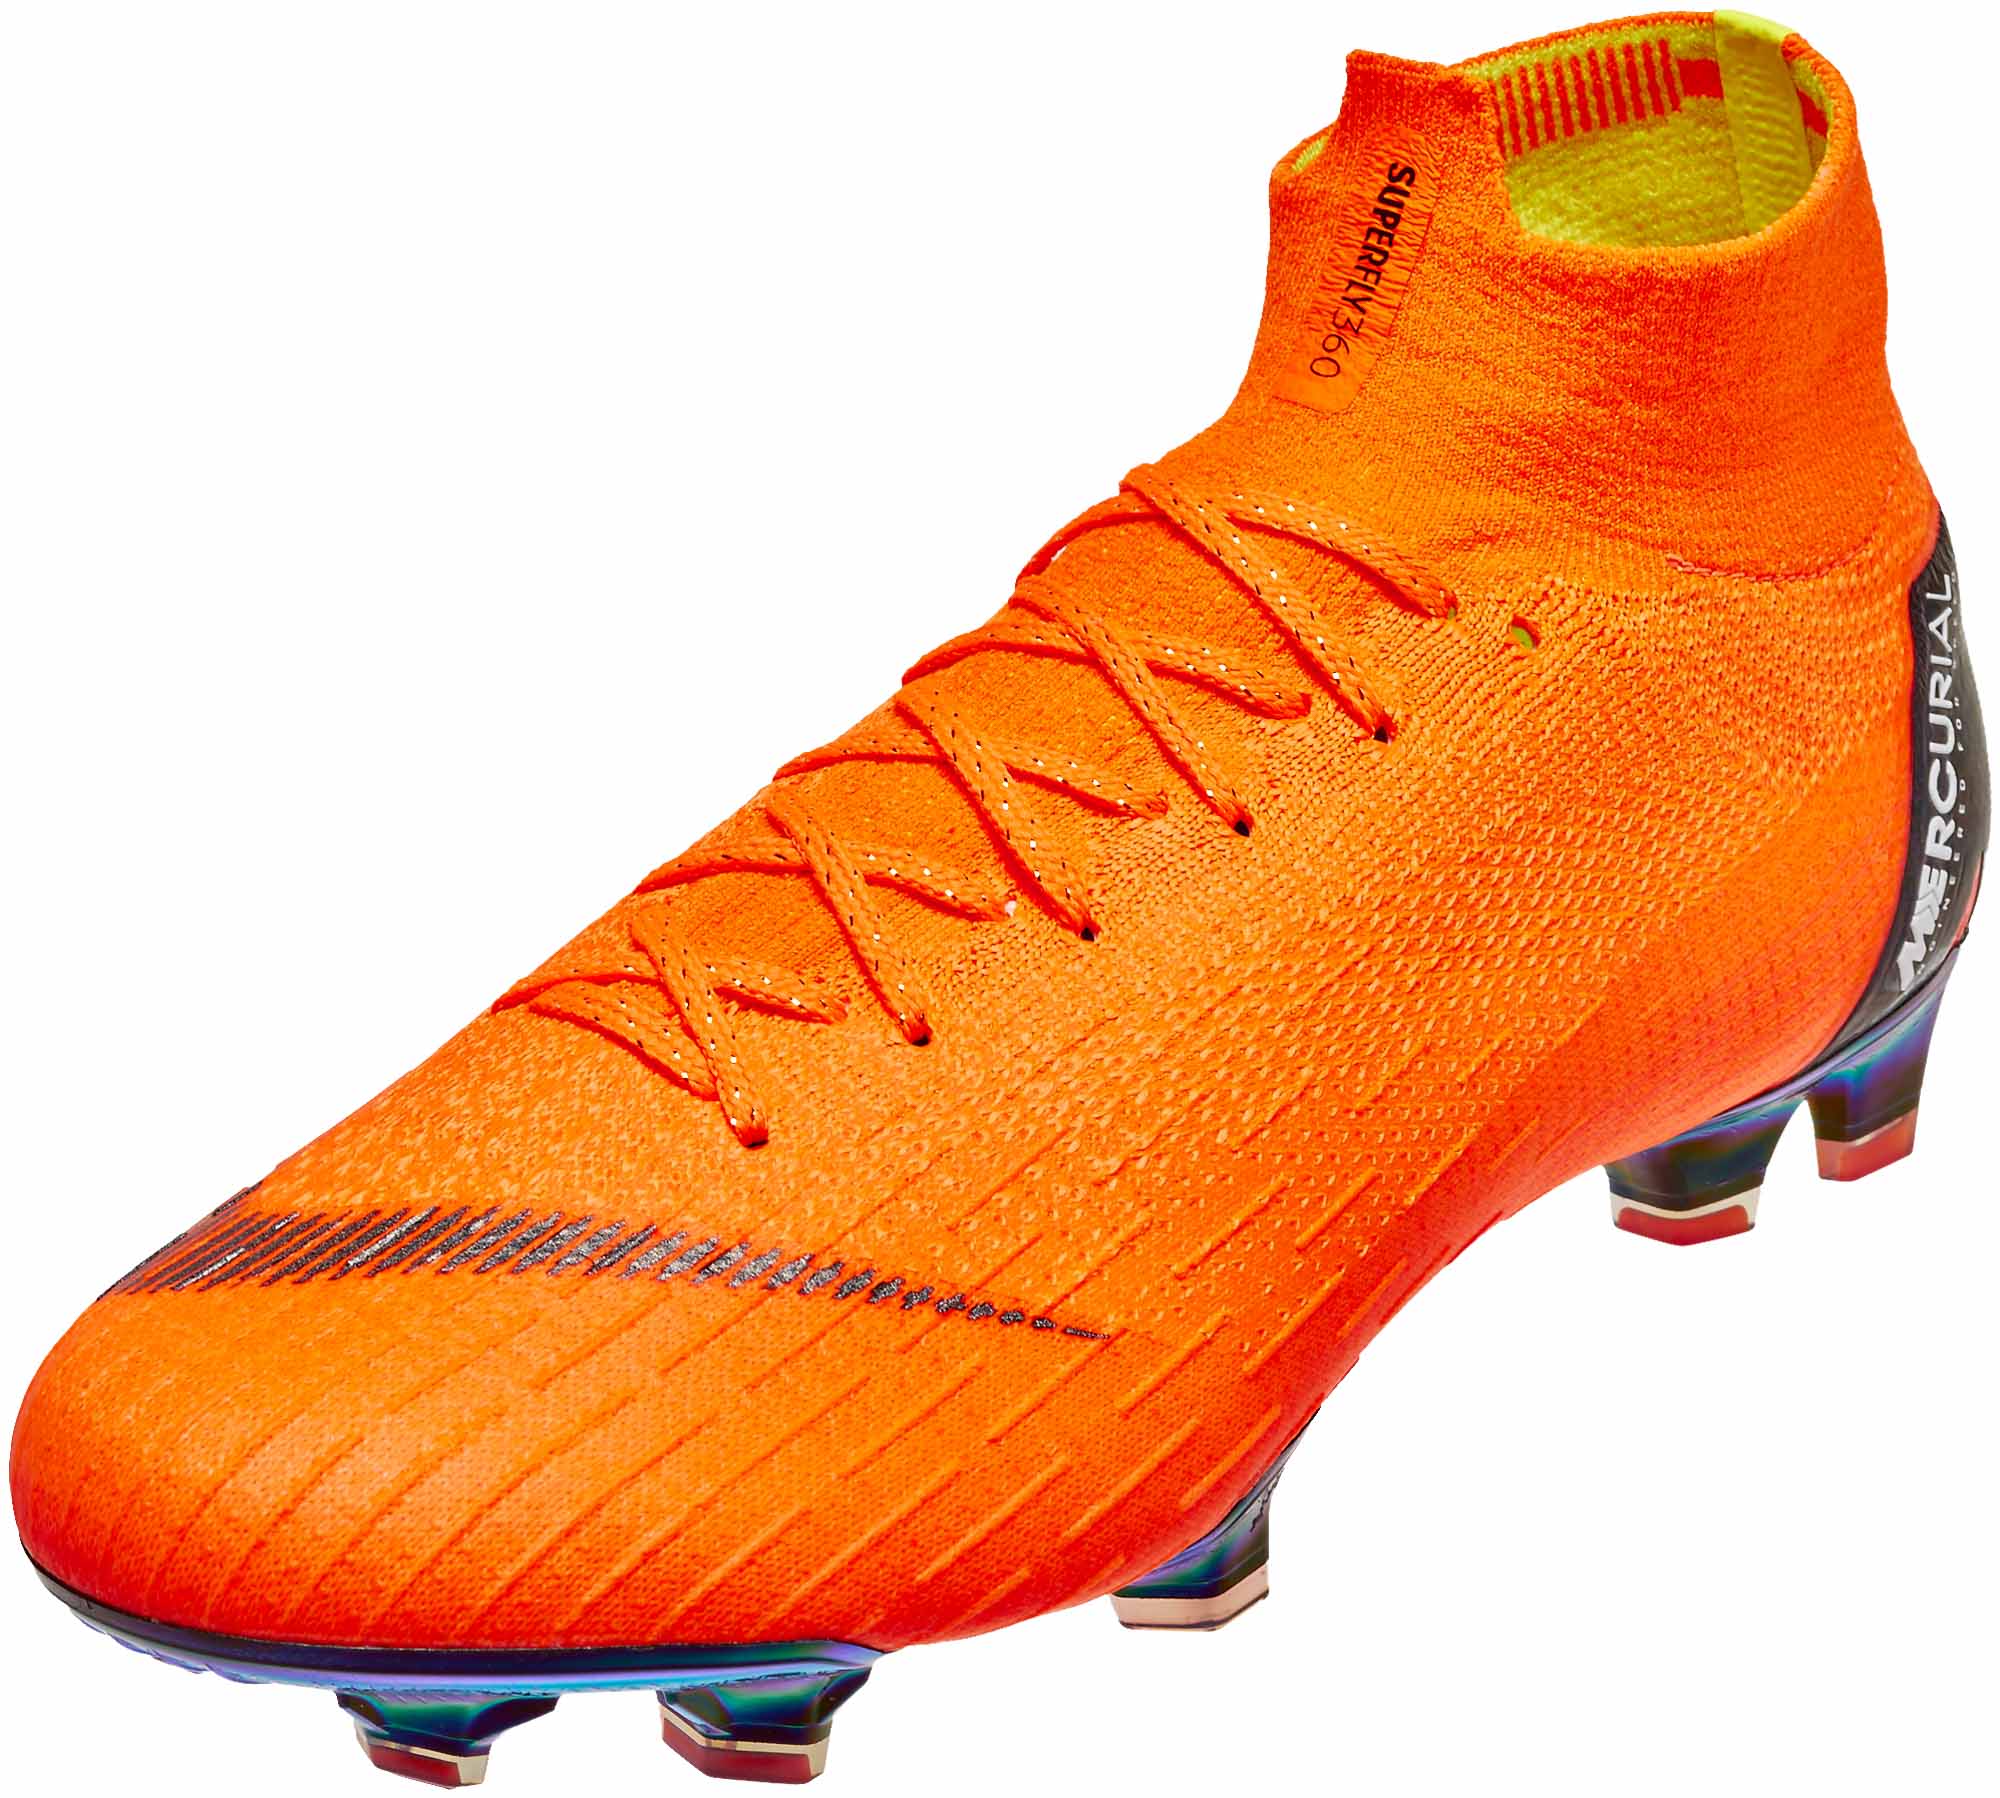 Nike Mercurial Superfly 6 Academy FG Soccer Cleats.